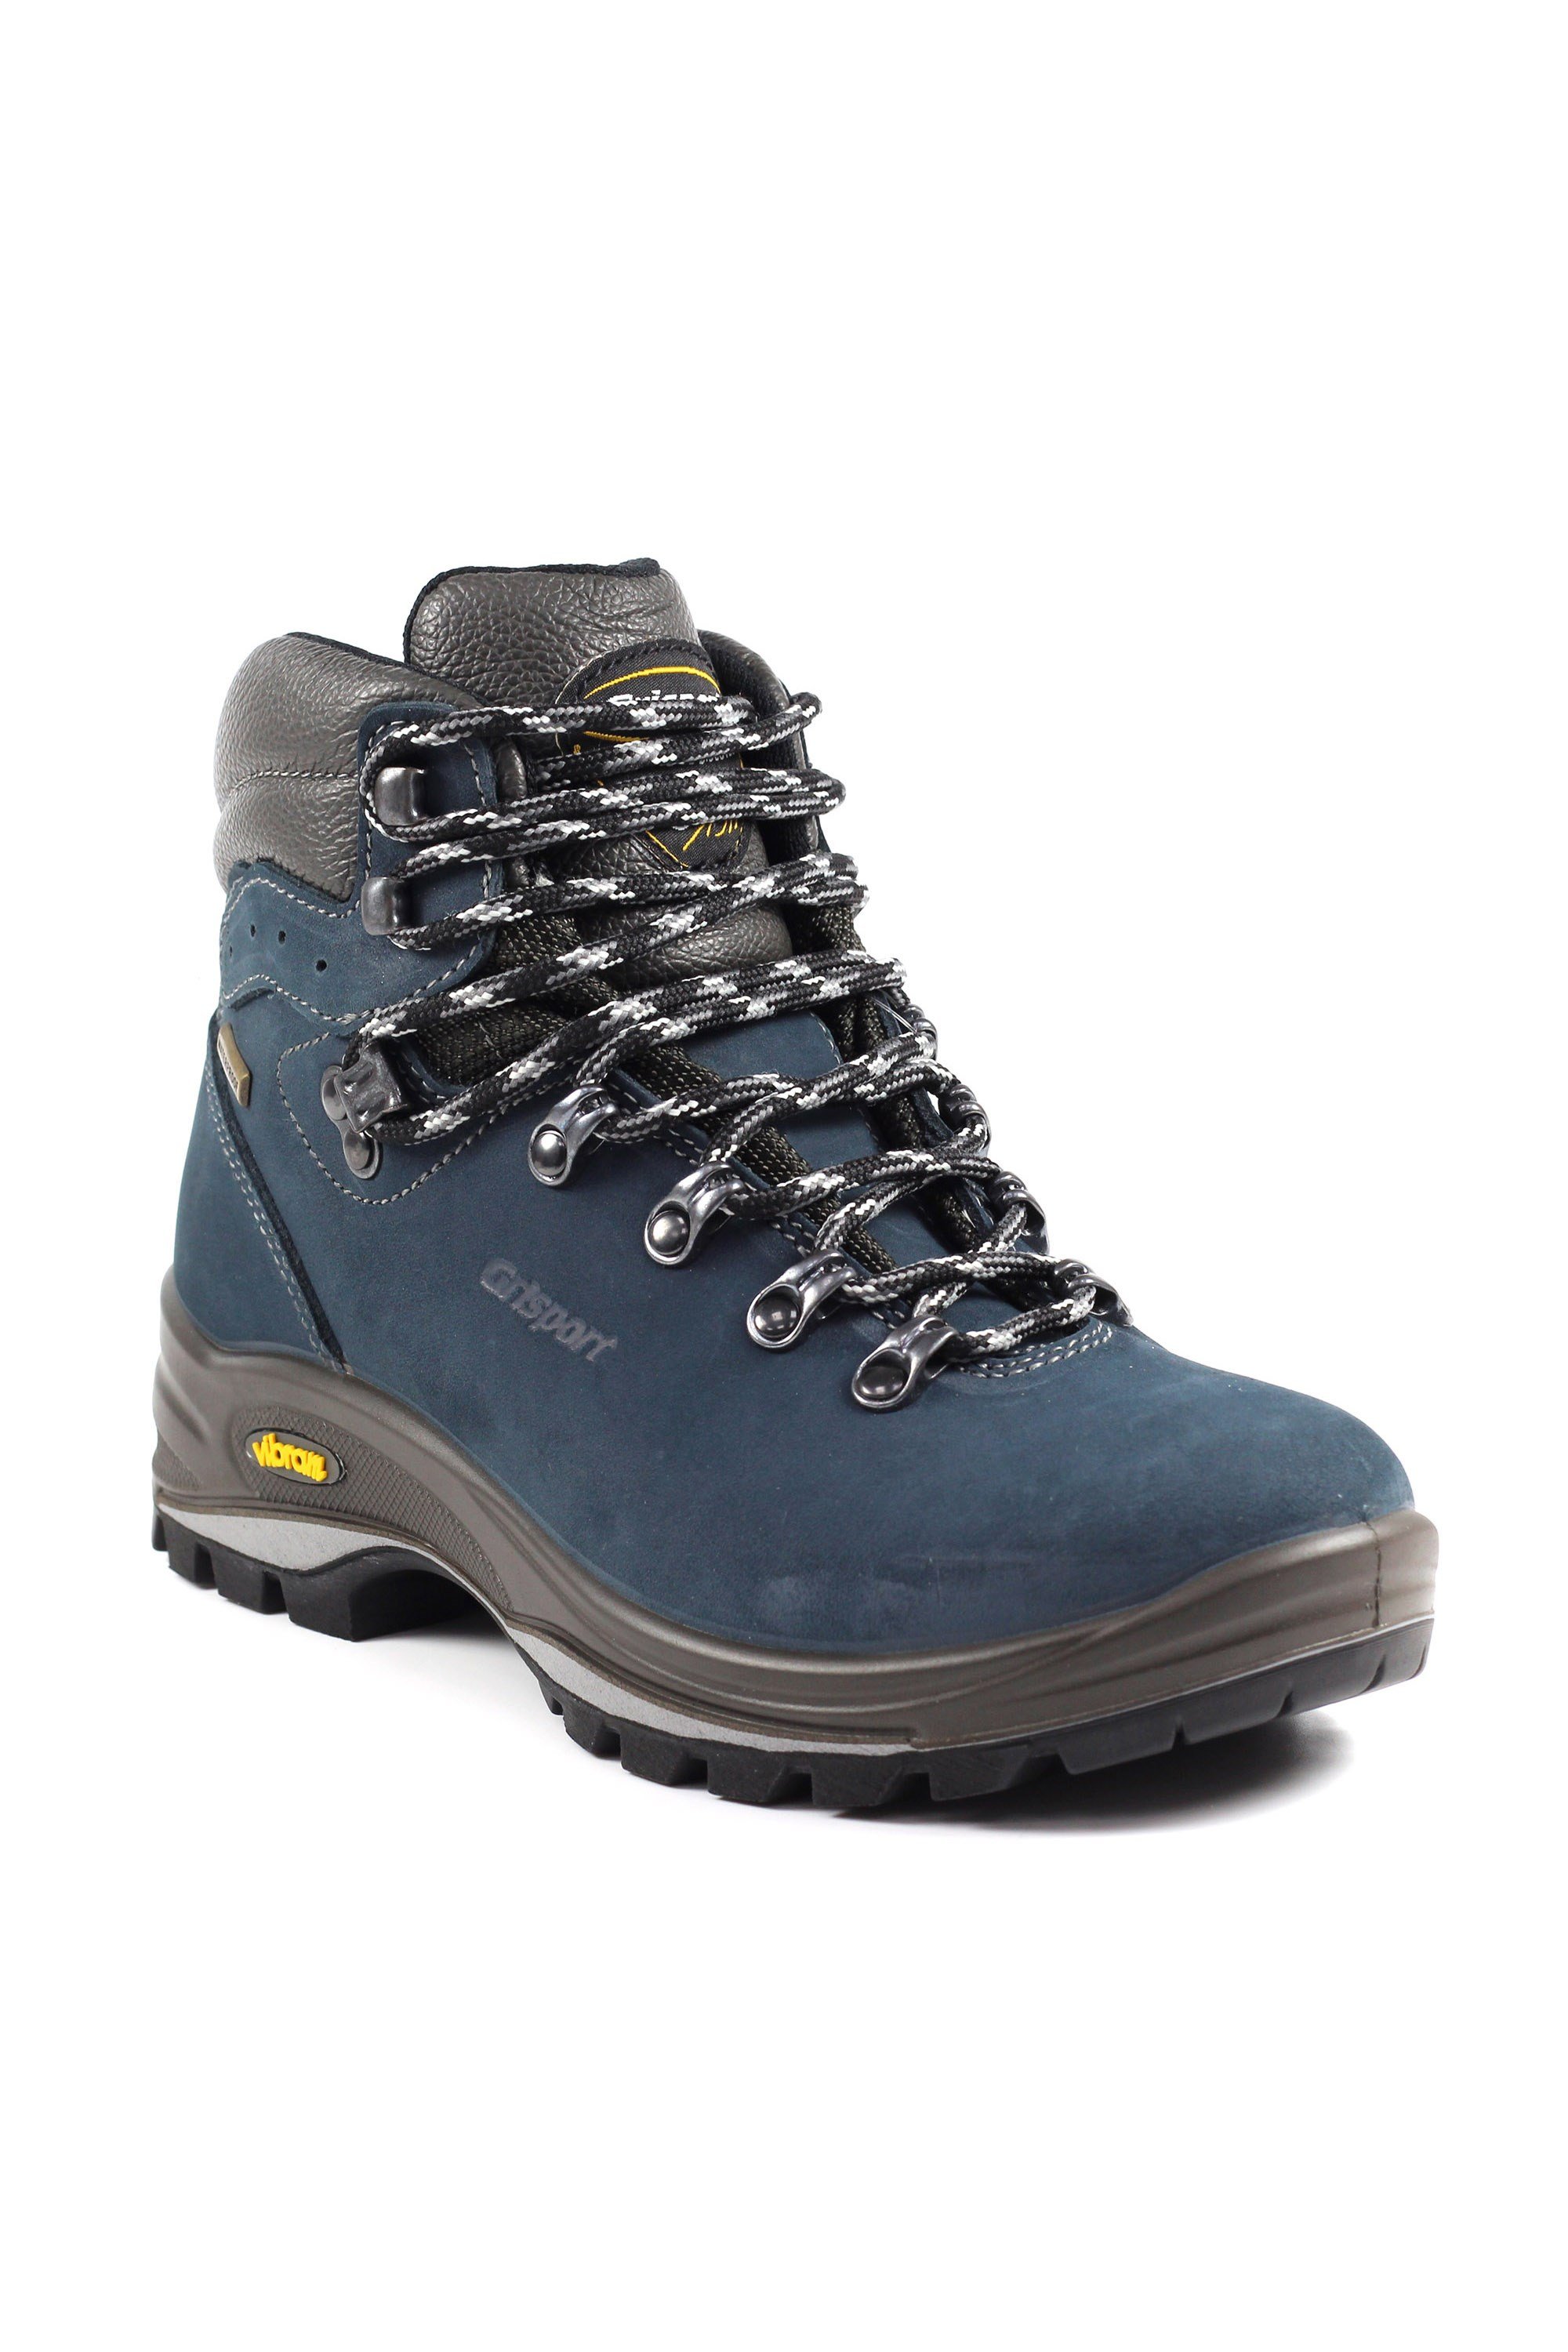 Tempest Womens Waterproof Hiking Boots -